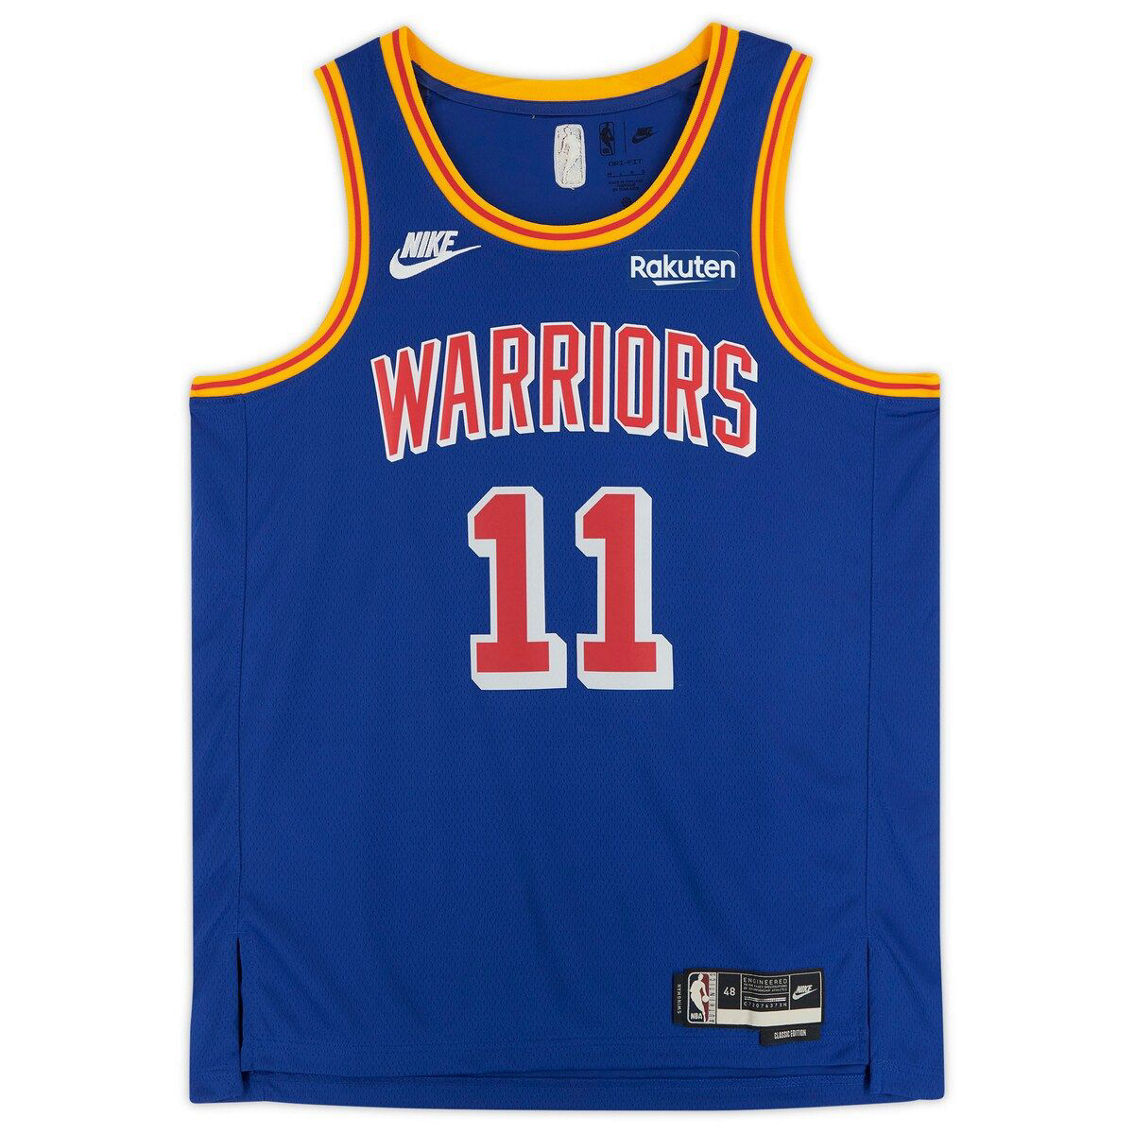 Fanatics Authentic Klay Thompson Royal Golden State Warriors Autographed 2021/22 Year 0 Swingman Jersey - Image 4 of 4